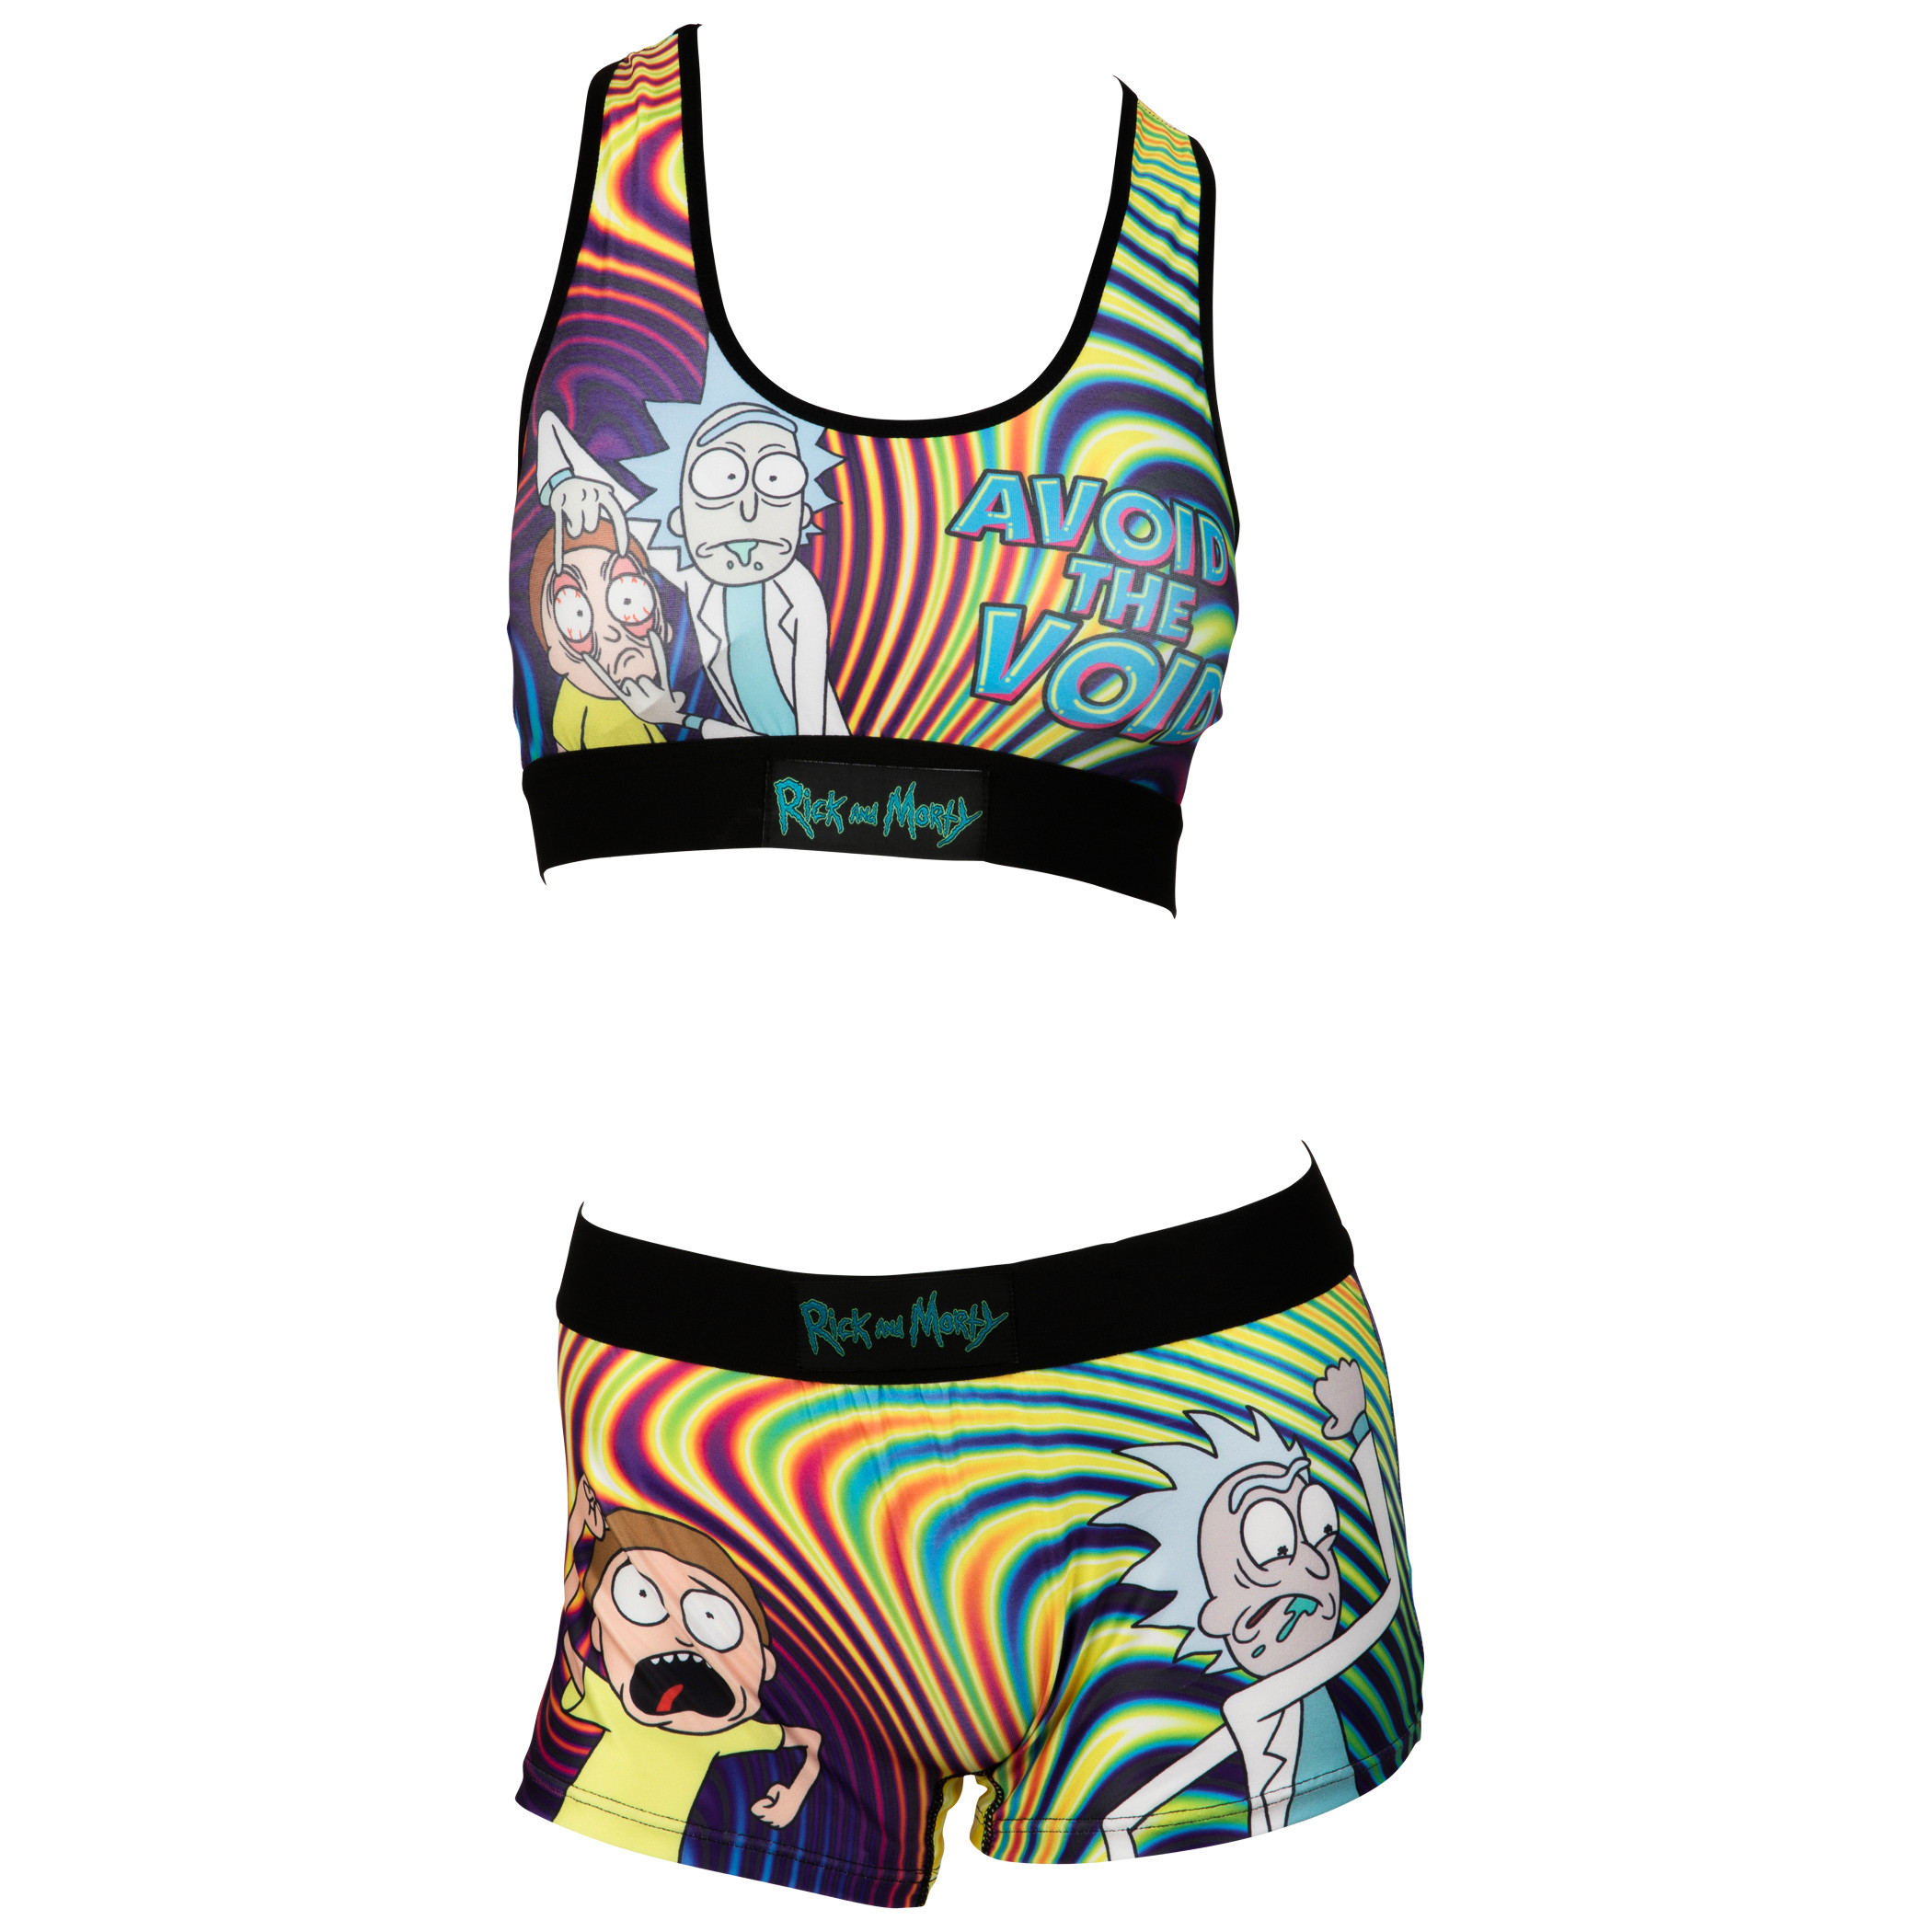 Rick And Morty Avoid The Void Sports Bra and Boy Short Panty Set